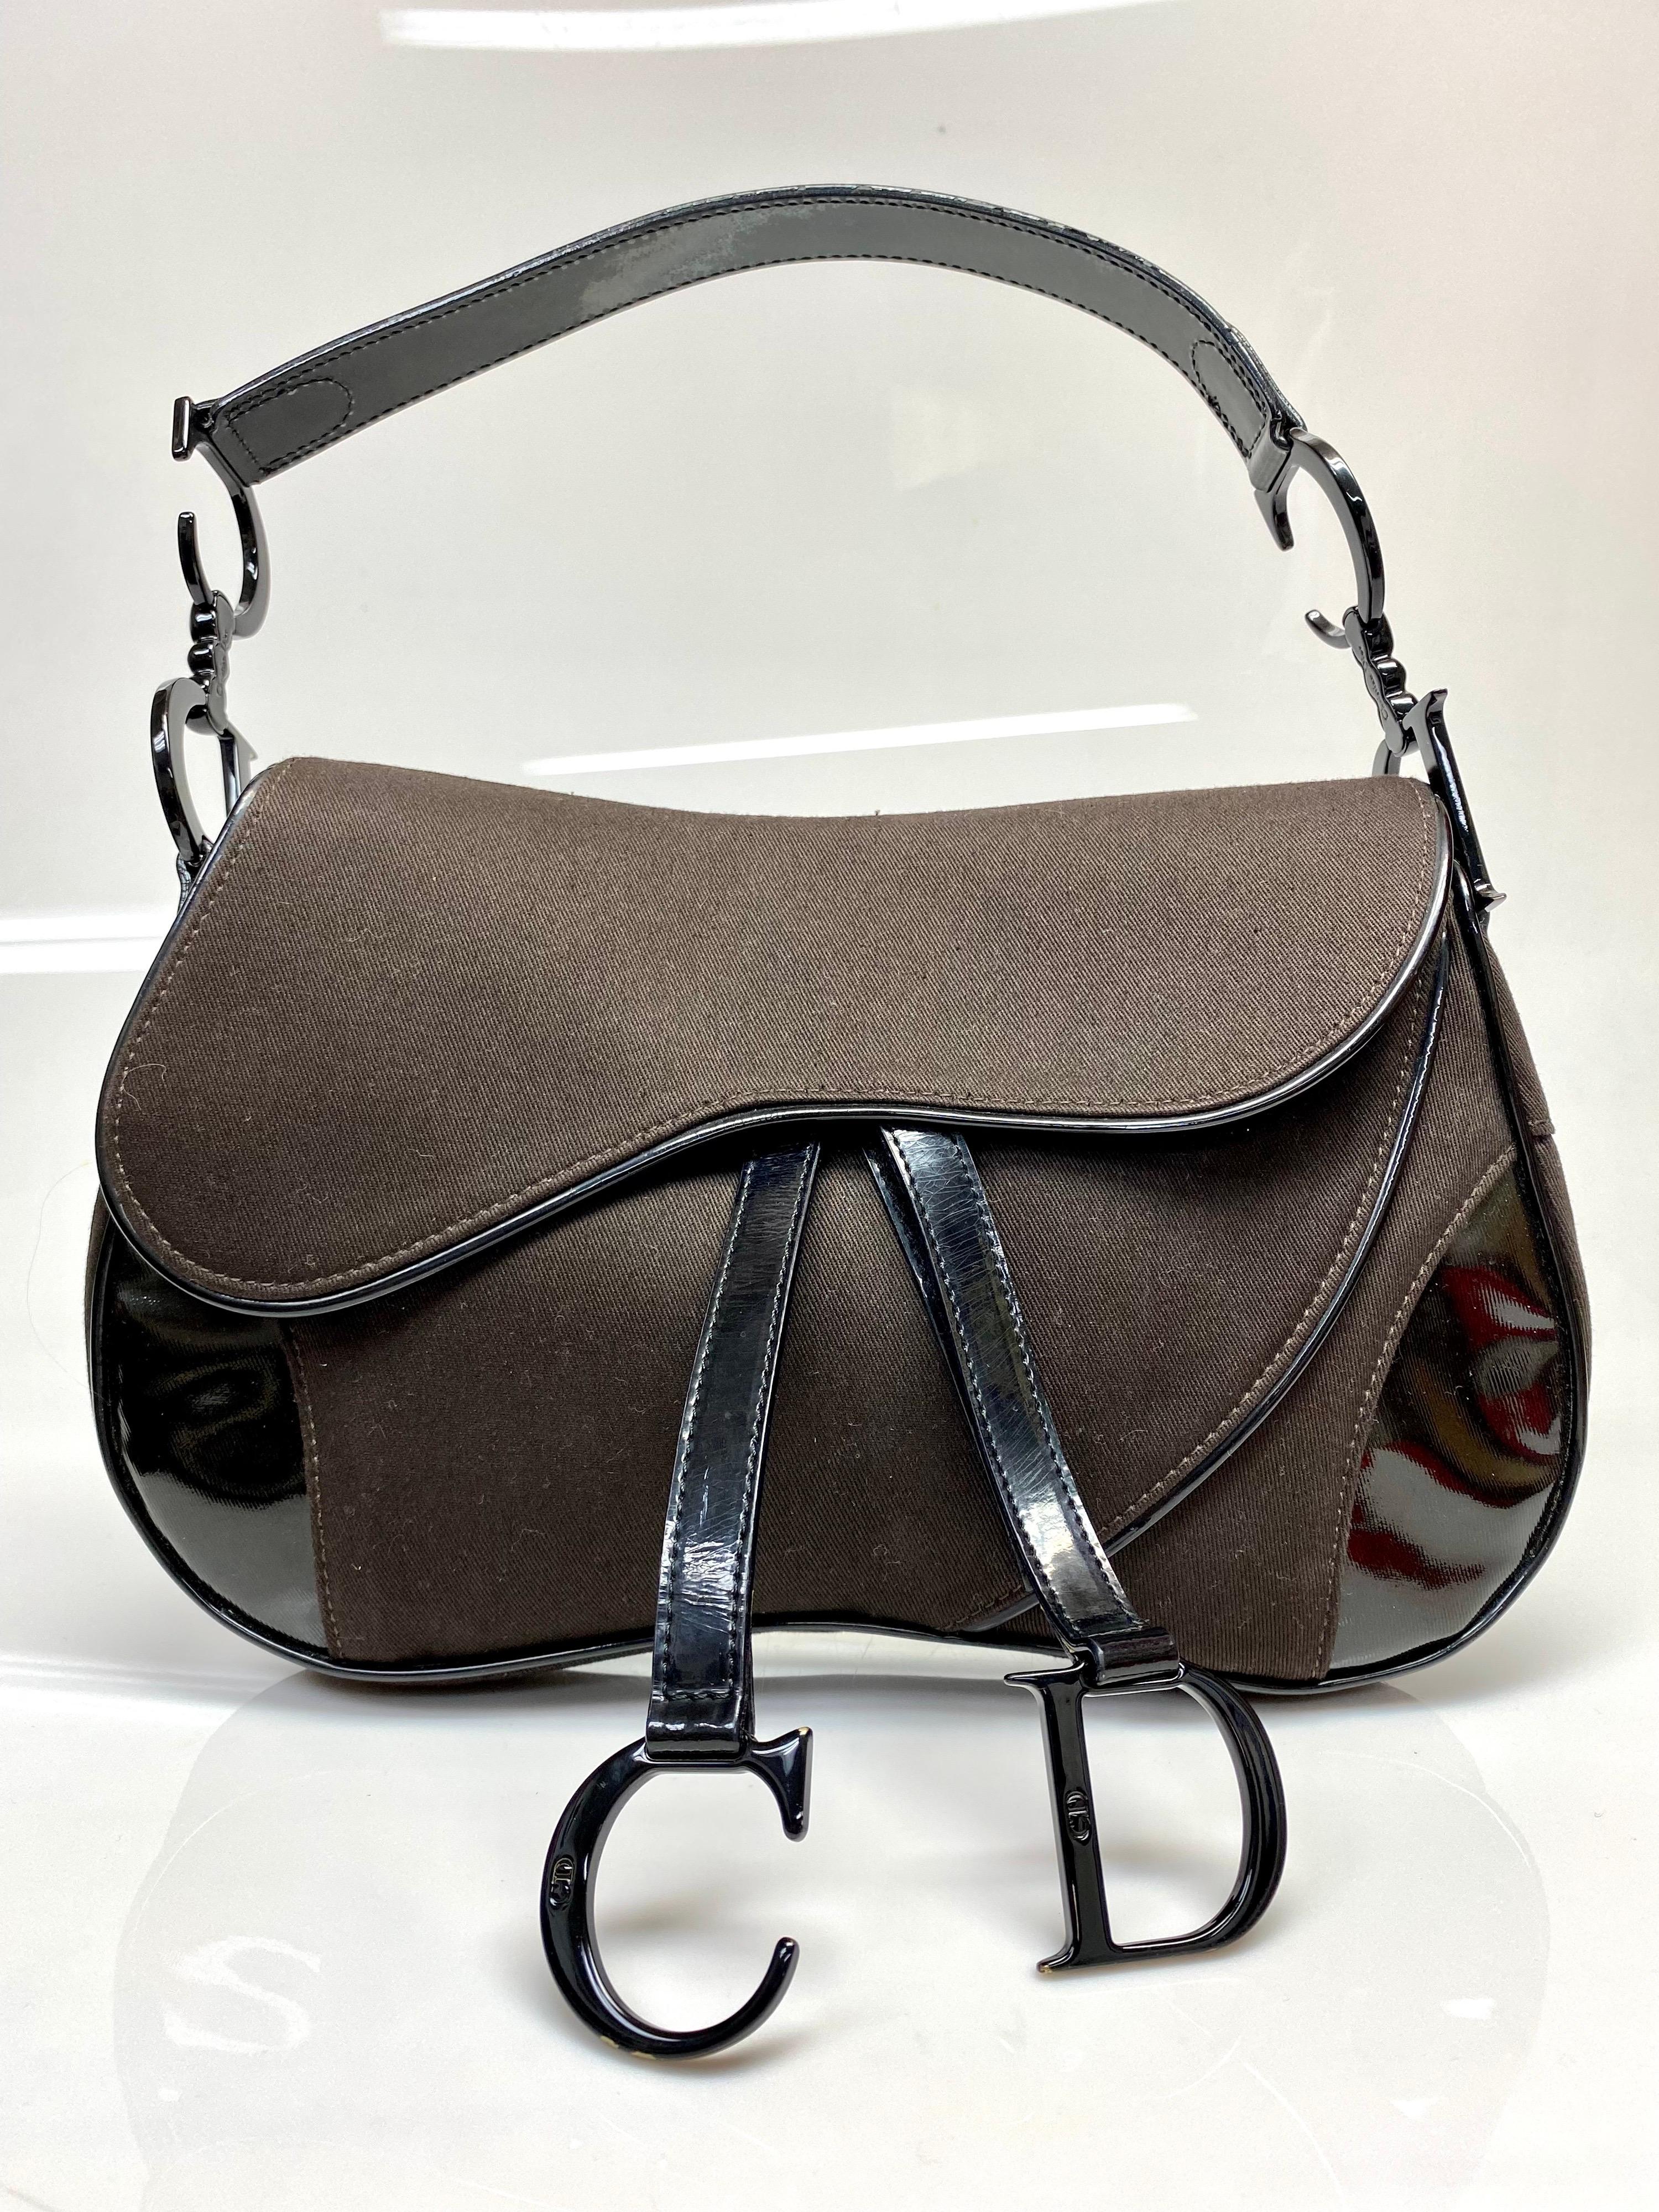 The iconic saddle bag is one of Christian Dior's most famous designs. This rare beauty features patent black hardware with the CD logo adorning both sides of the bag. The chocolate brown color will go perfect with any fashionista's wardrobe. The bag